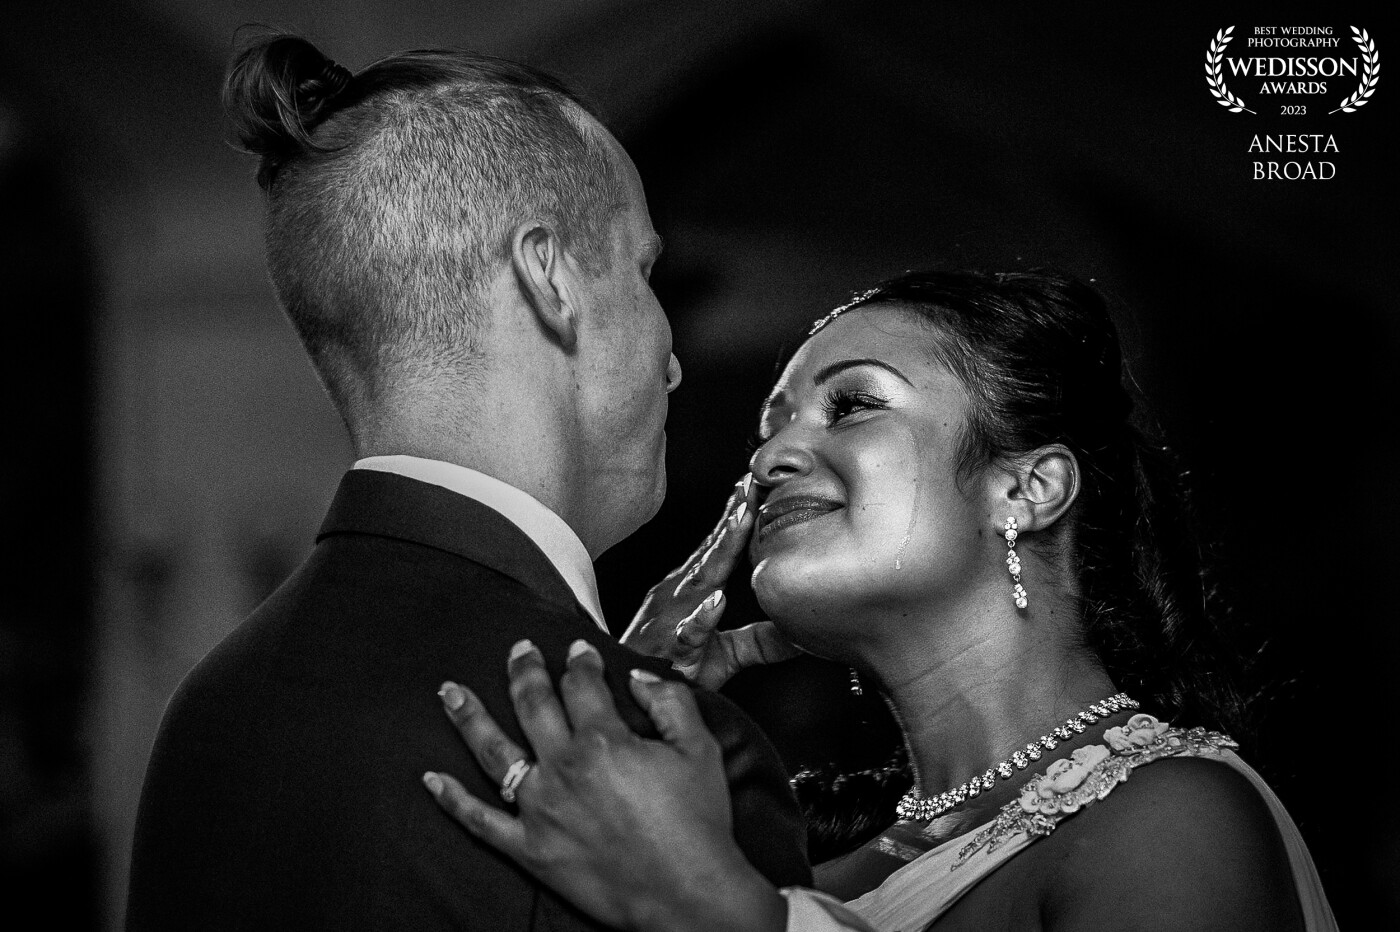 This couple travelled from the UK to Portugal to get married surrounded by their closest friends and family. After sunset, they took to the centre of the floor for their first dance. They were completely lost in the moment. It was beautiful.